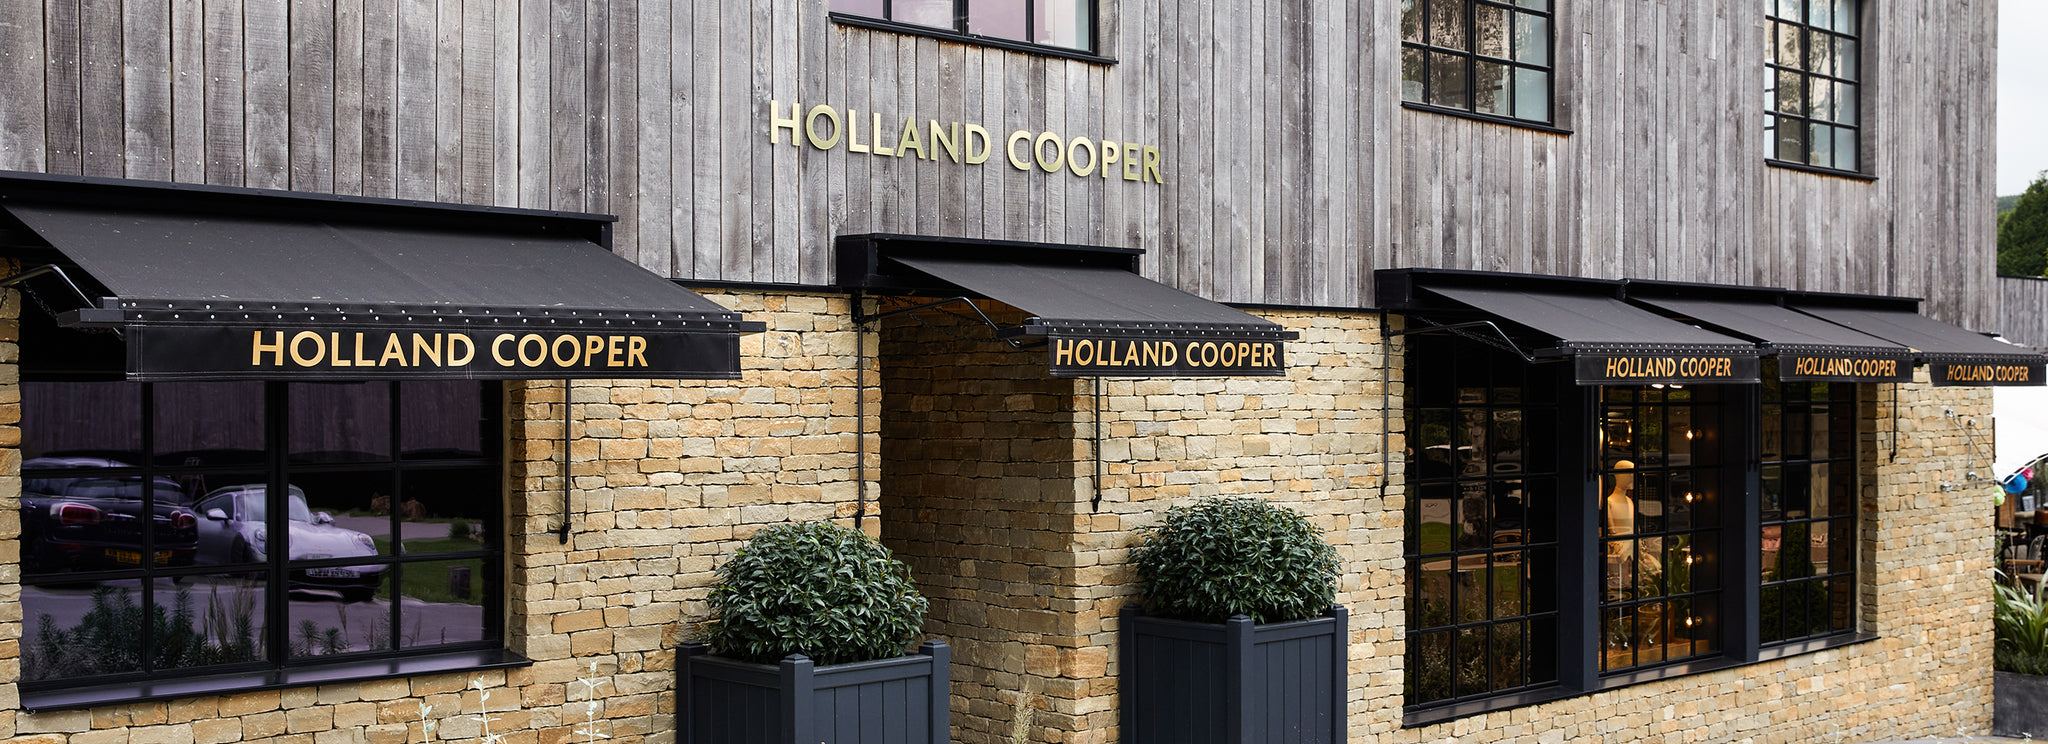 Holland Cooper Womens Boutique Store with gold lettering and cotswold yellow stone building with black glass window